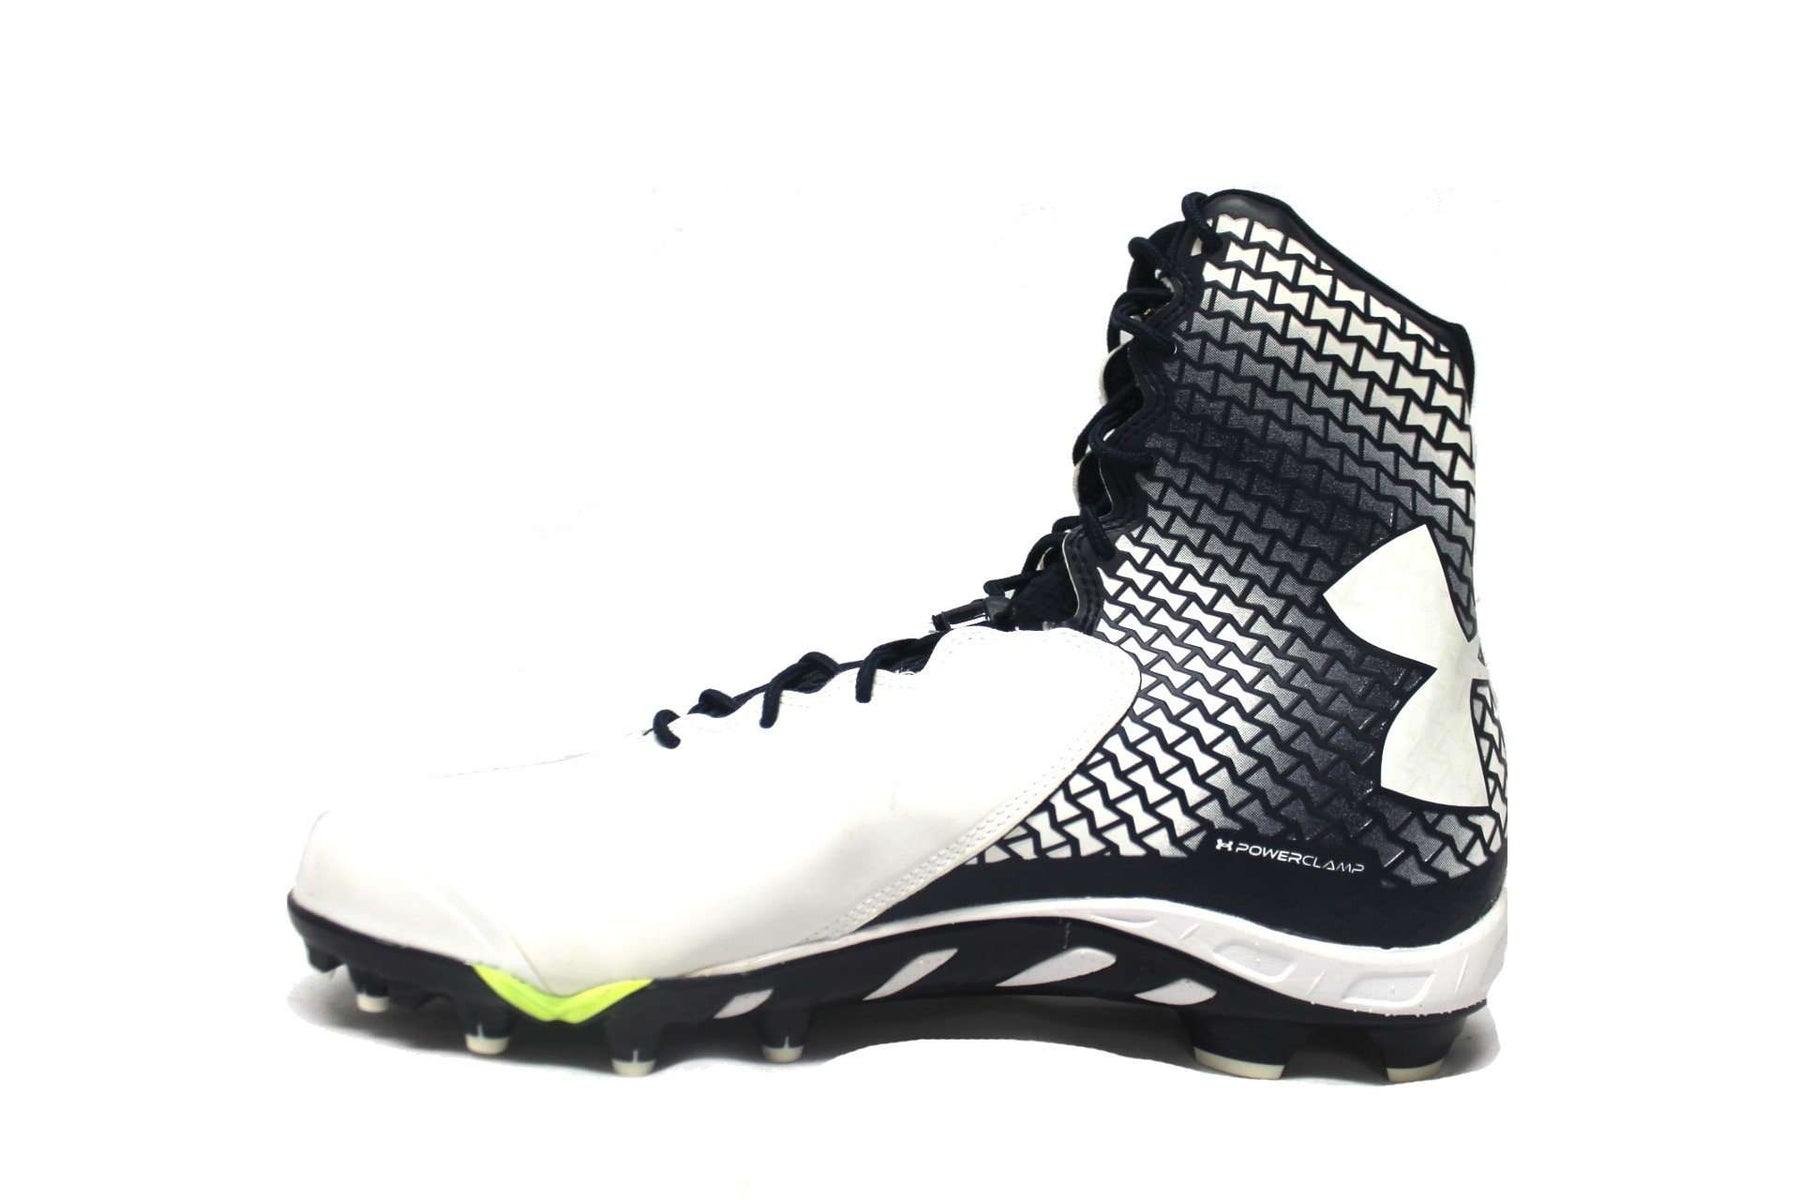 under armour brawler cleats for sale